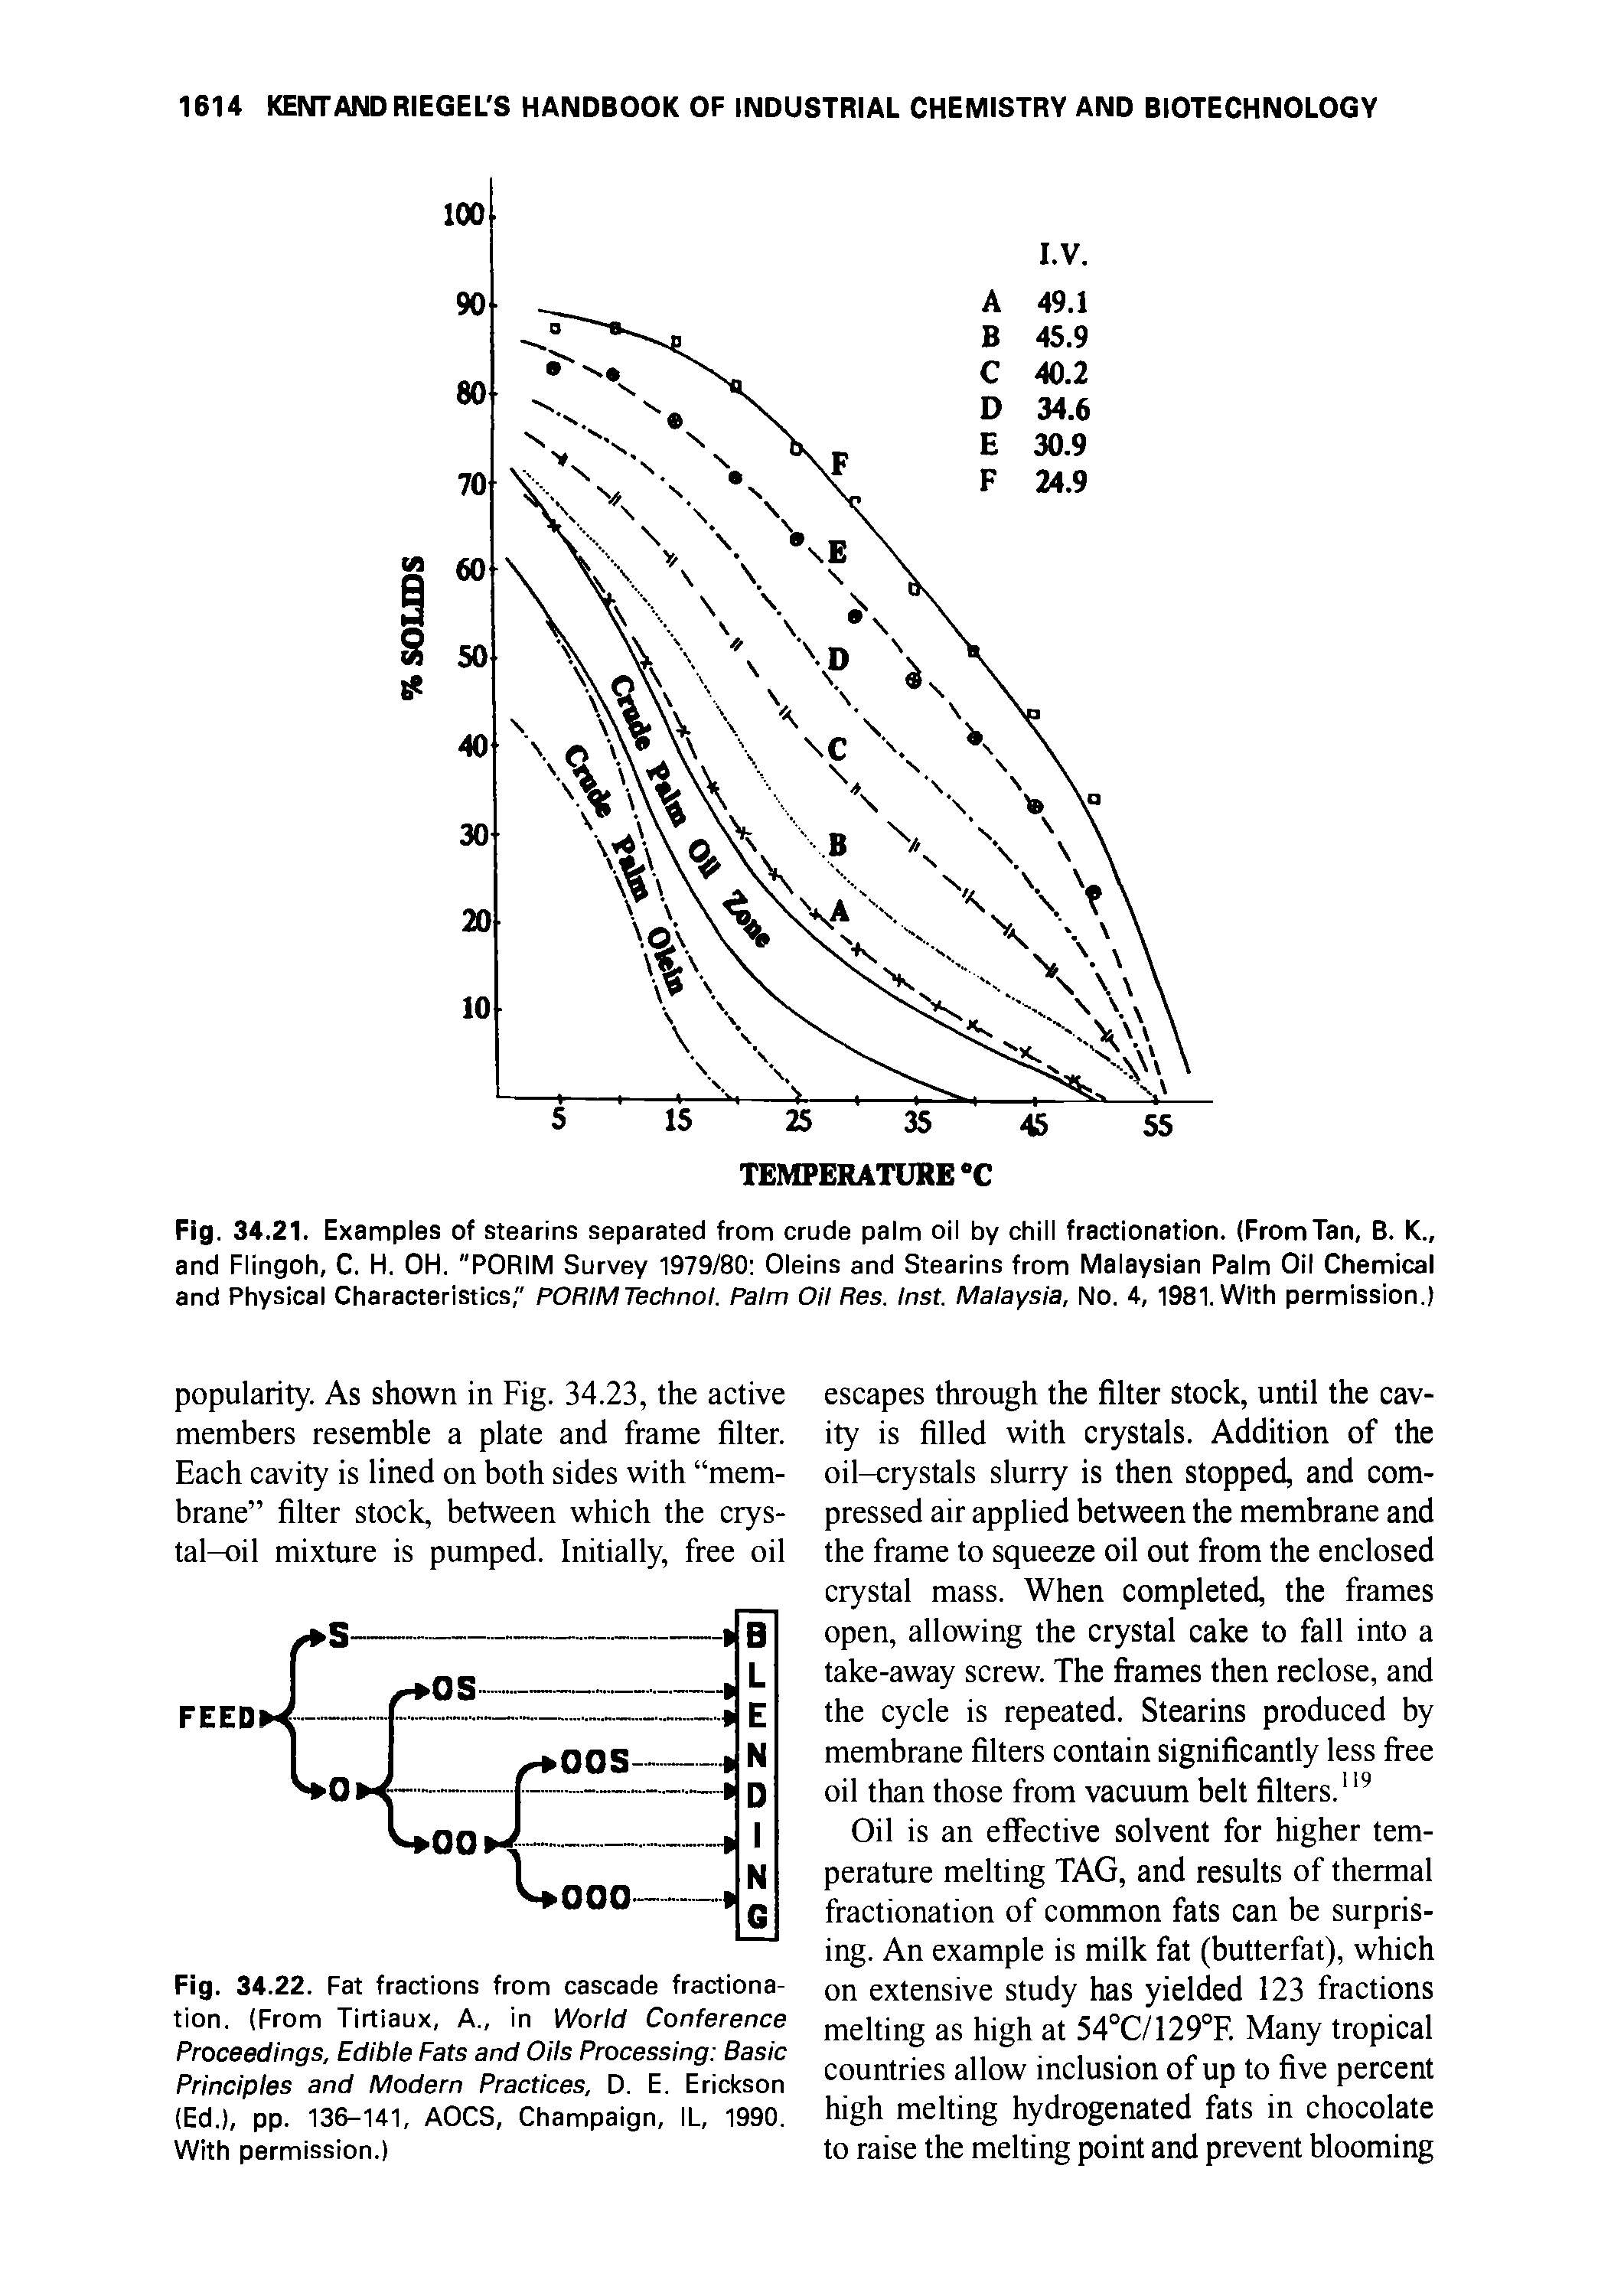 Fig. 34.22. Fat fractions from cascade fractionation. (From Tirtiaux, A., in World Conference Proceedings, Edible Fats and Oils Processing Basic Principles and Modern Practices, D. E. Erickson (Ed.), pp. 136-141, AOCS, Champaign, IL, 1990. With permission.)...